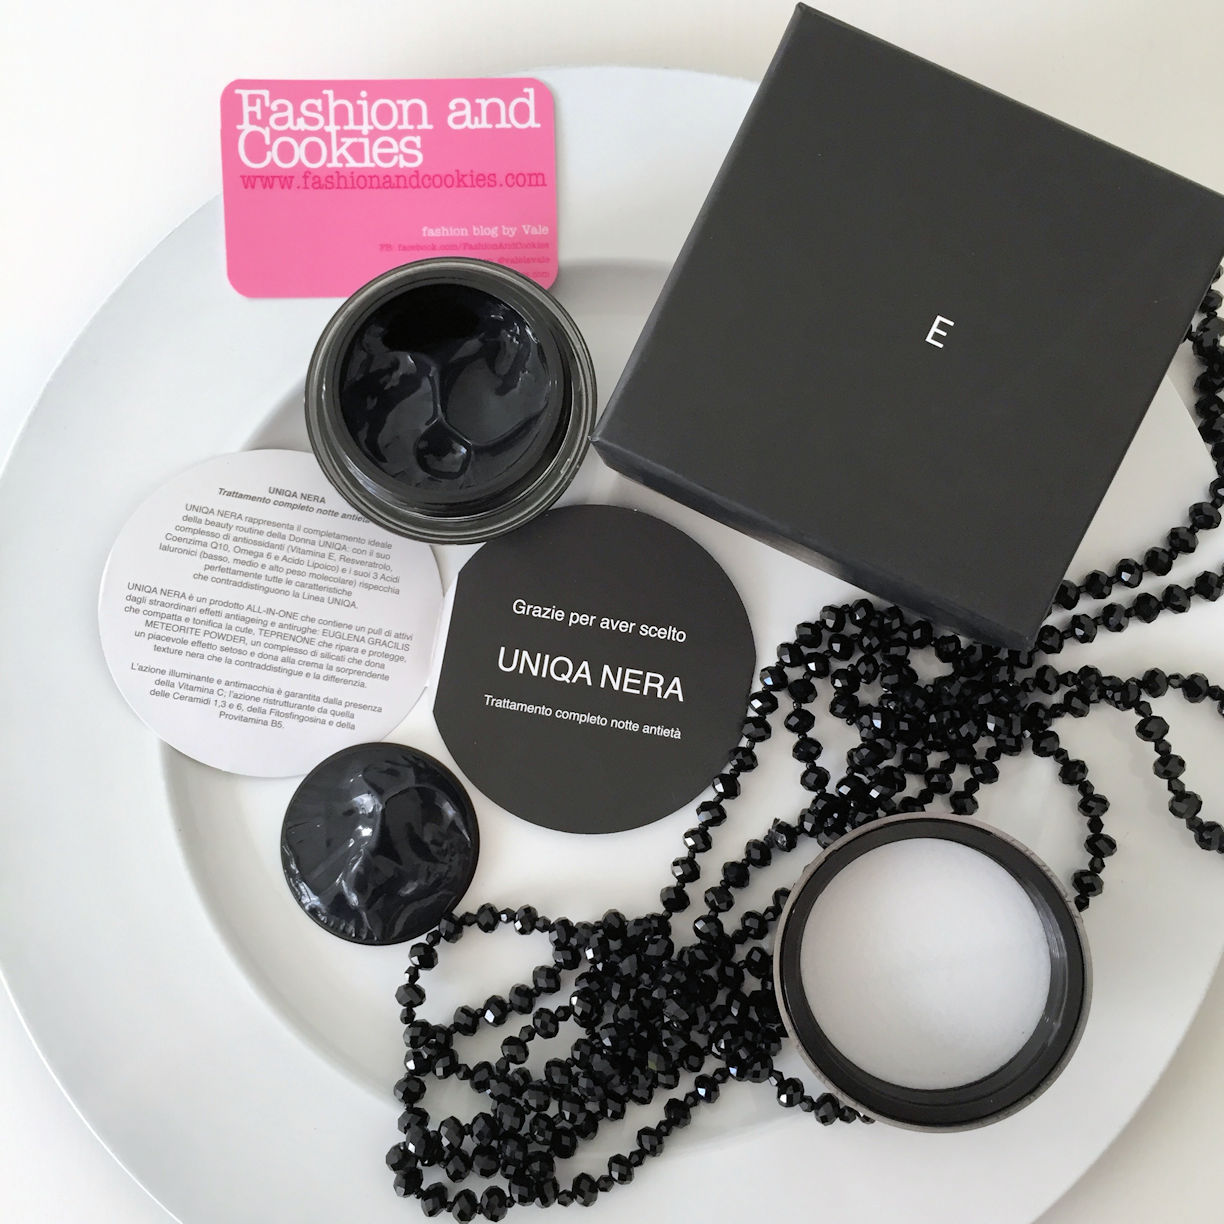 Uniqa Nera by Pea Cosmetics black anti-age night-time cream on Fashion and Cookies beauty blog, beauty blogger